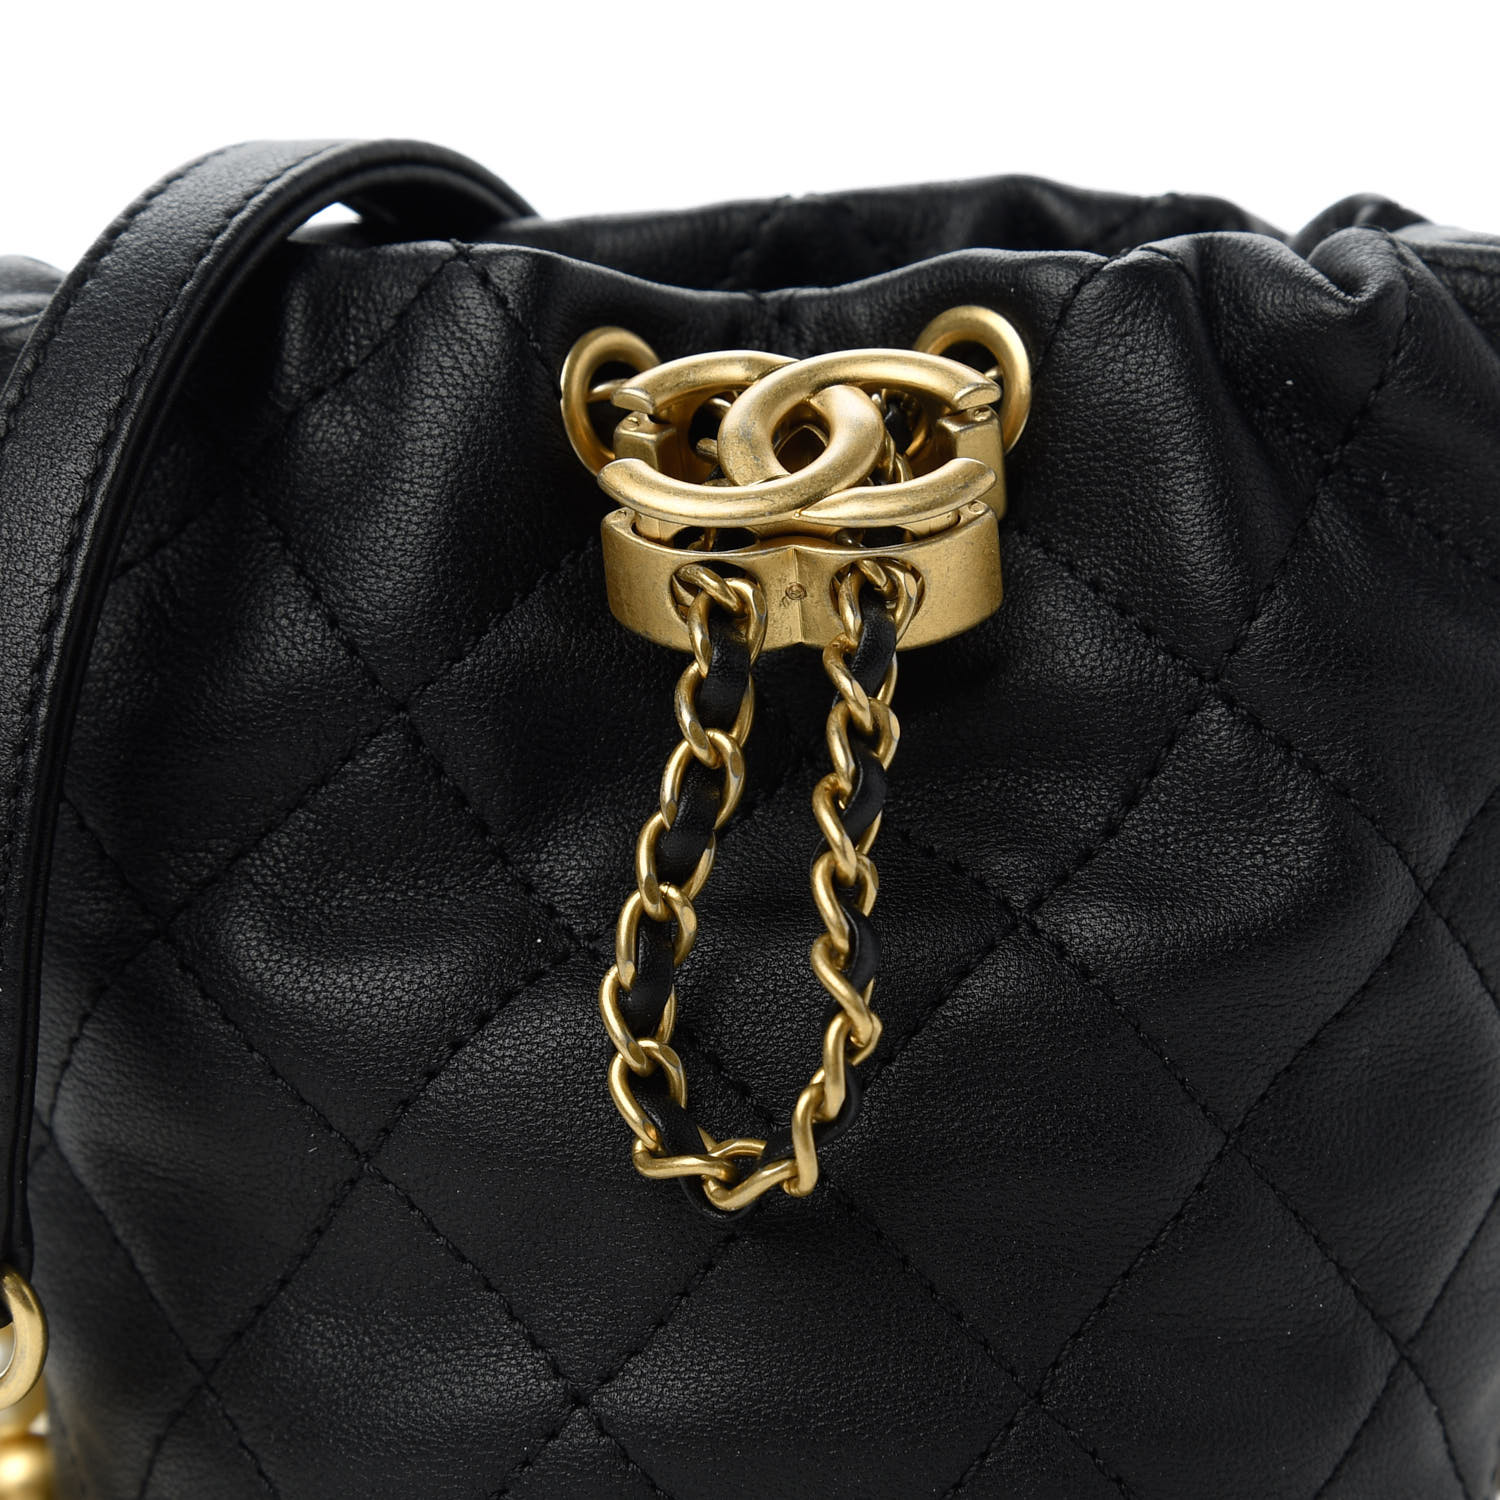 CHANEL Calfskin Quilted Pearl Mini About Pearls Drawstring Bucket Bag ...